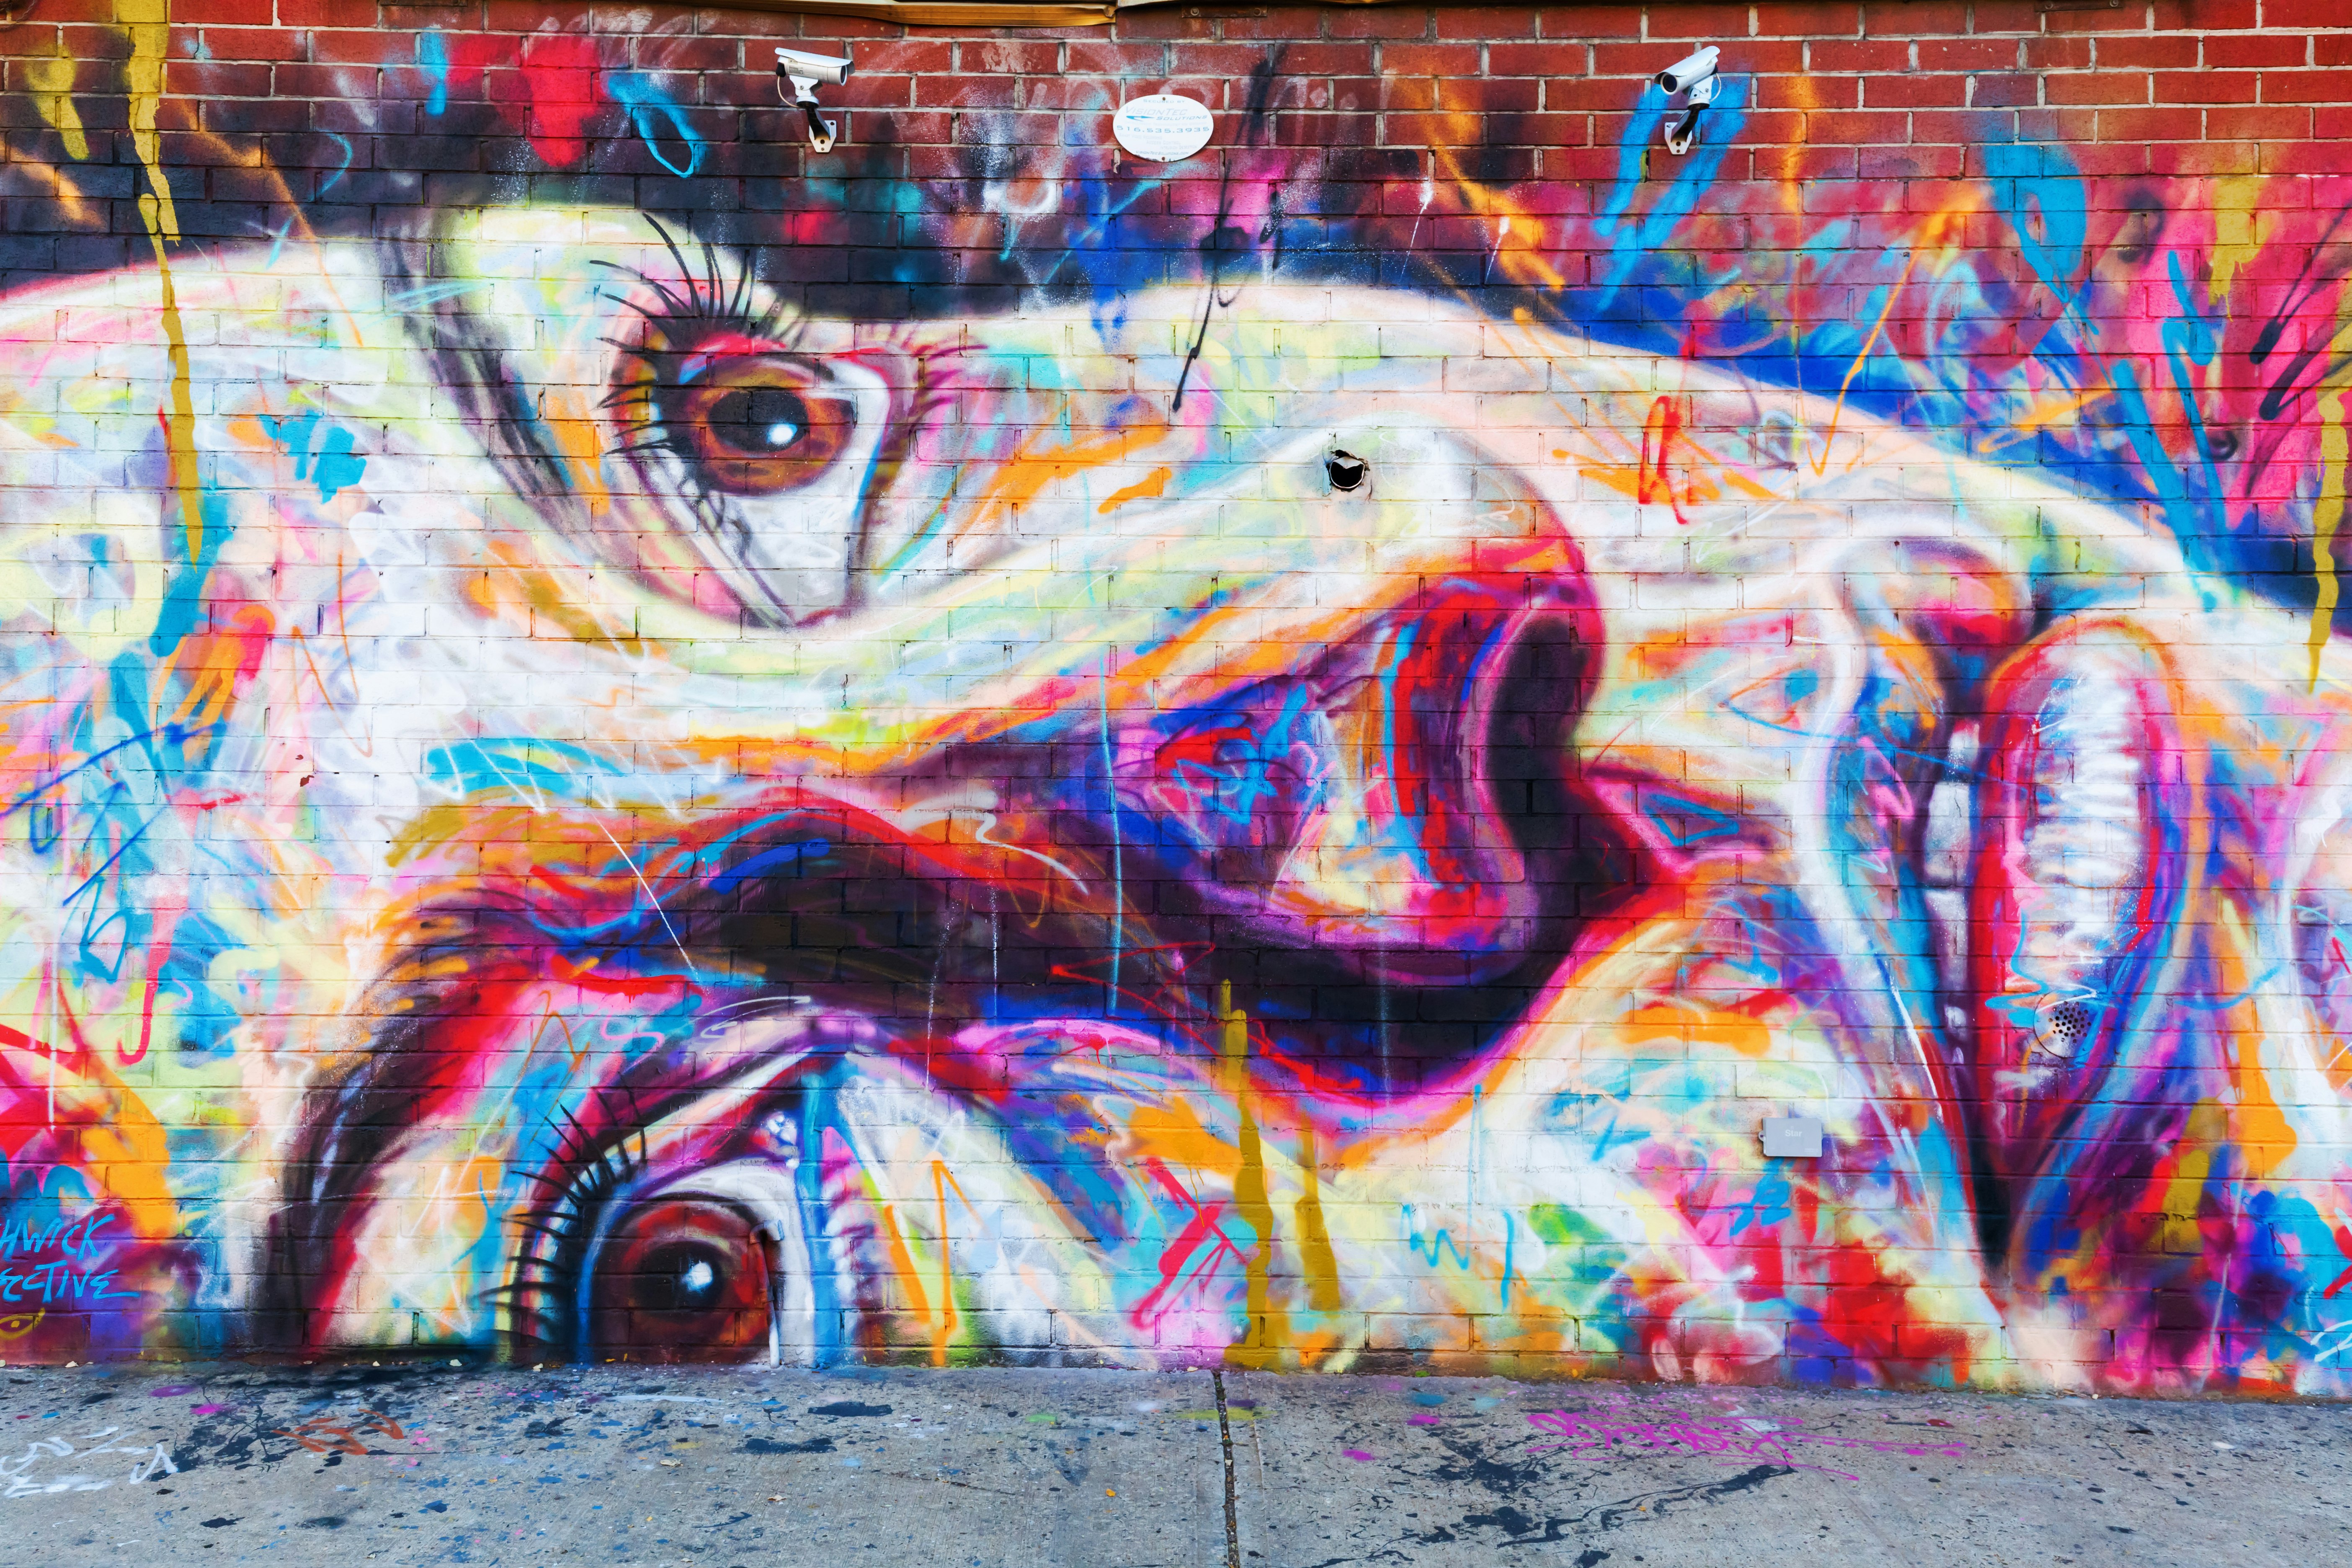 A colorful graffiti image of a woman with her eyes looking to the sky painted on a wall in New York City.